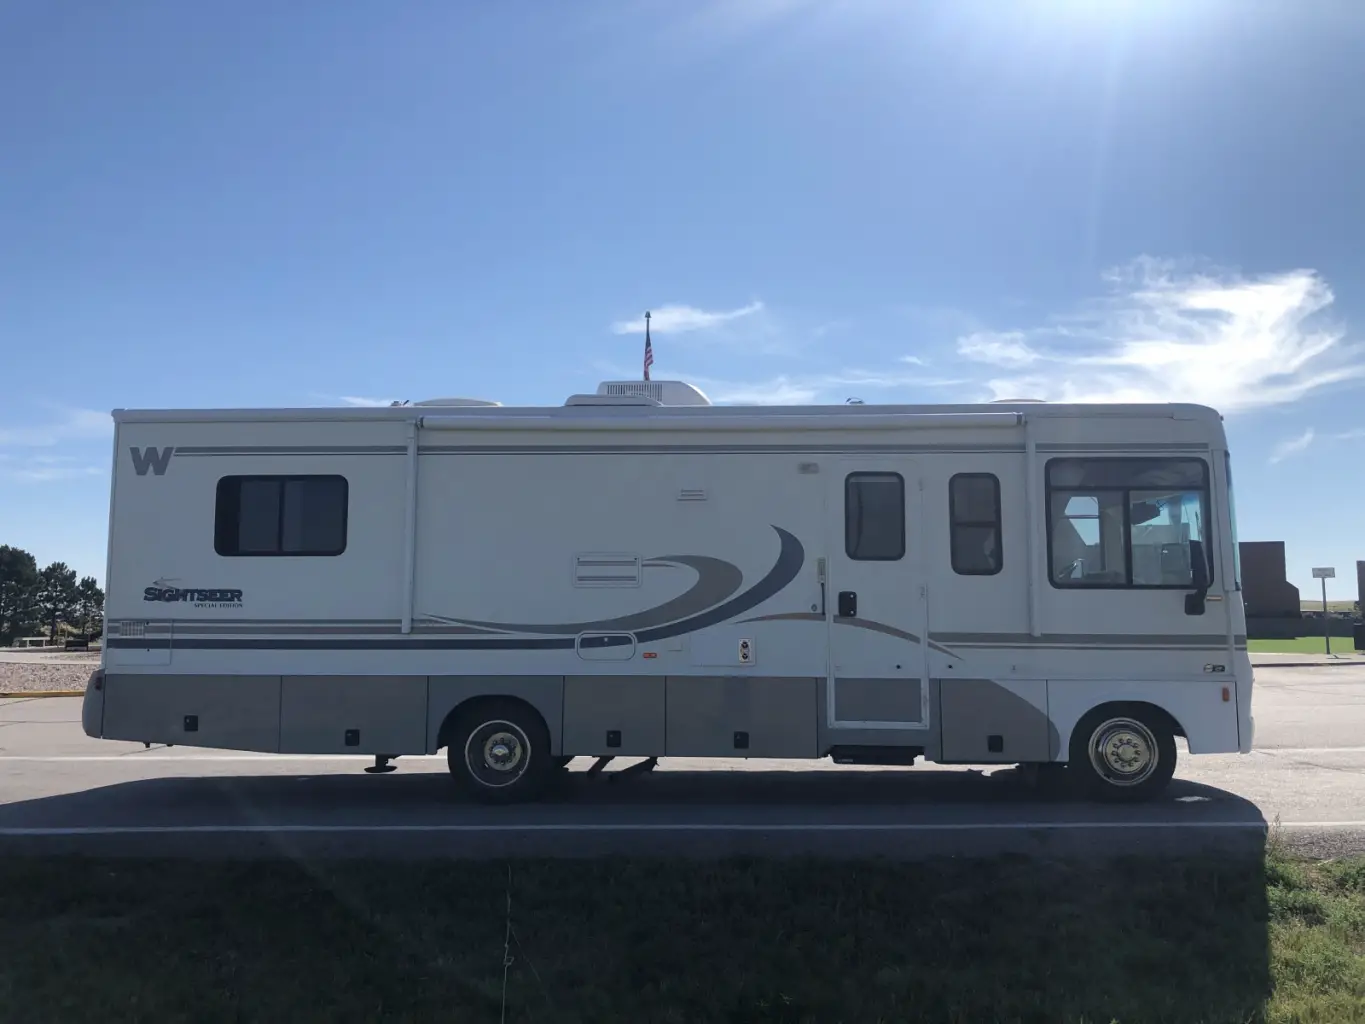 How to have internet in a RV